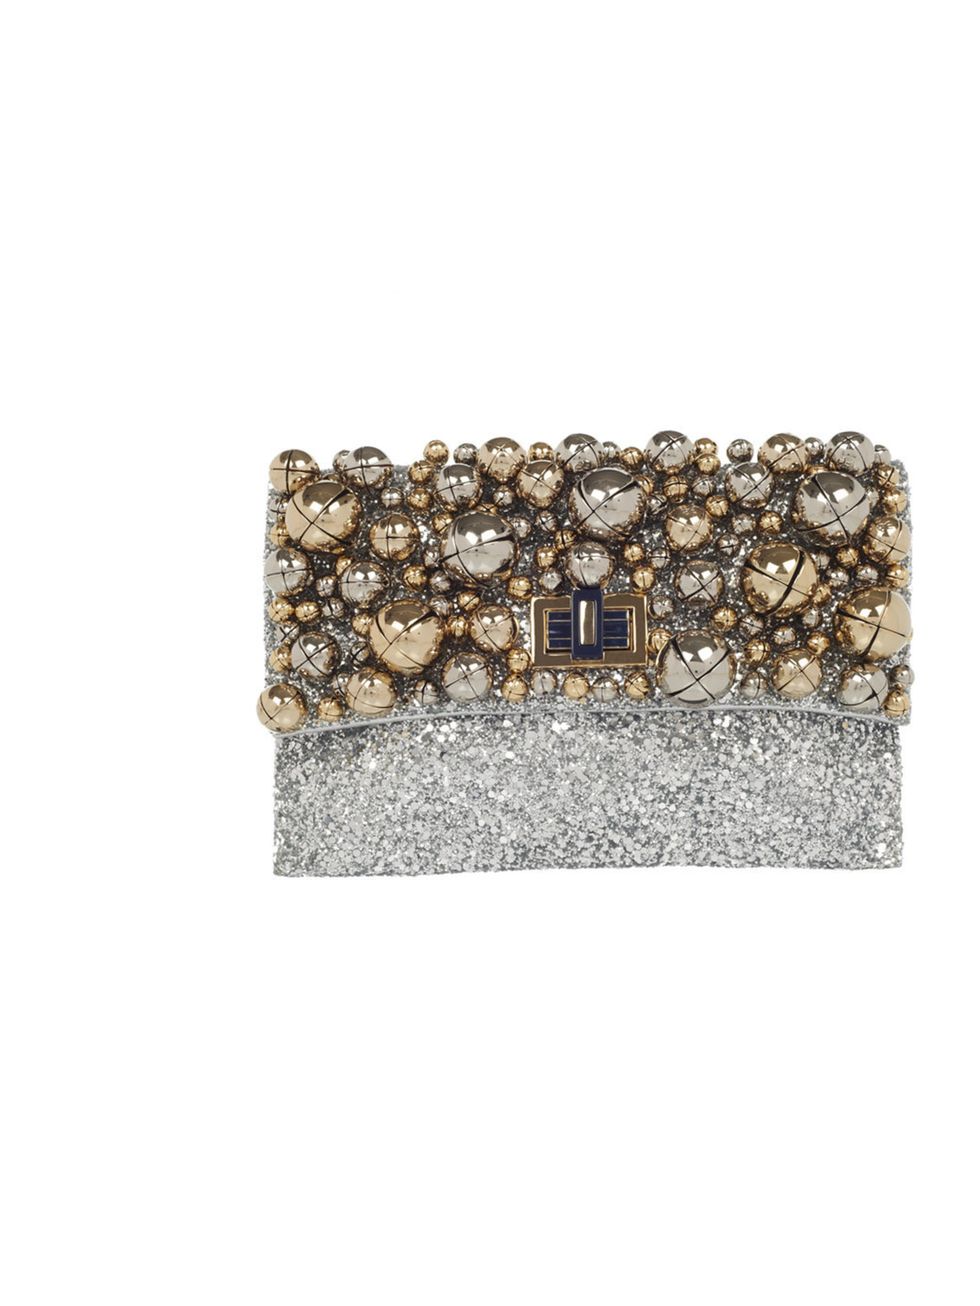 <p>Anya Hindmarch 'Valorie Bells' clutch, £895</p><p><a href="http://www.anyahindmarch.com/prod/Clutch/Handbags/Valorie_Bells_Glitter_Fabric/44192/">BUY NOW </a></p>